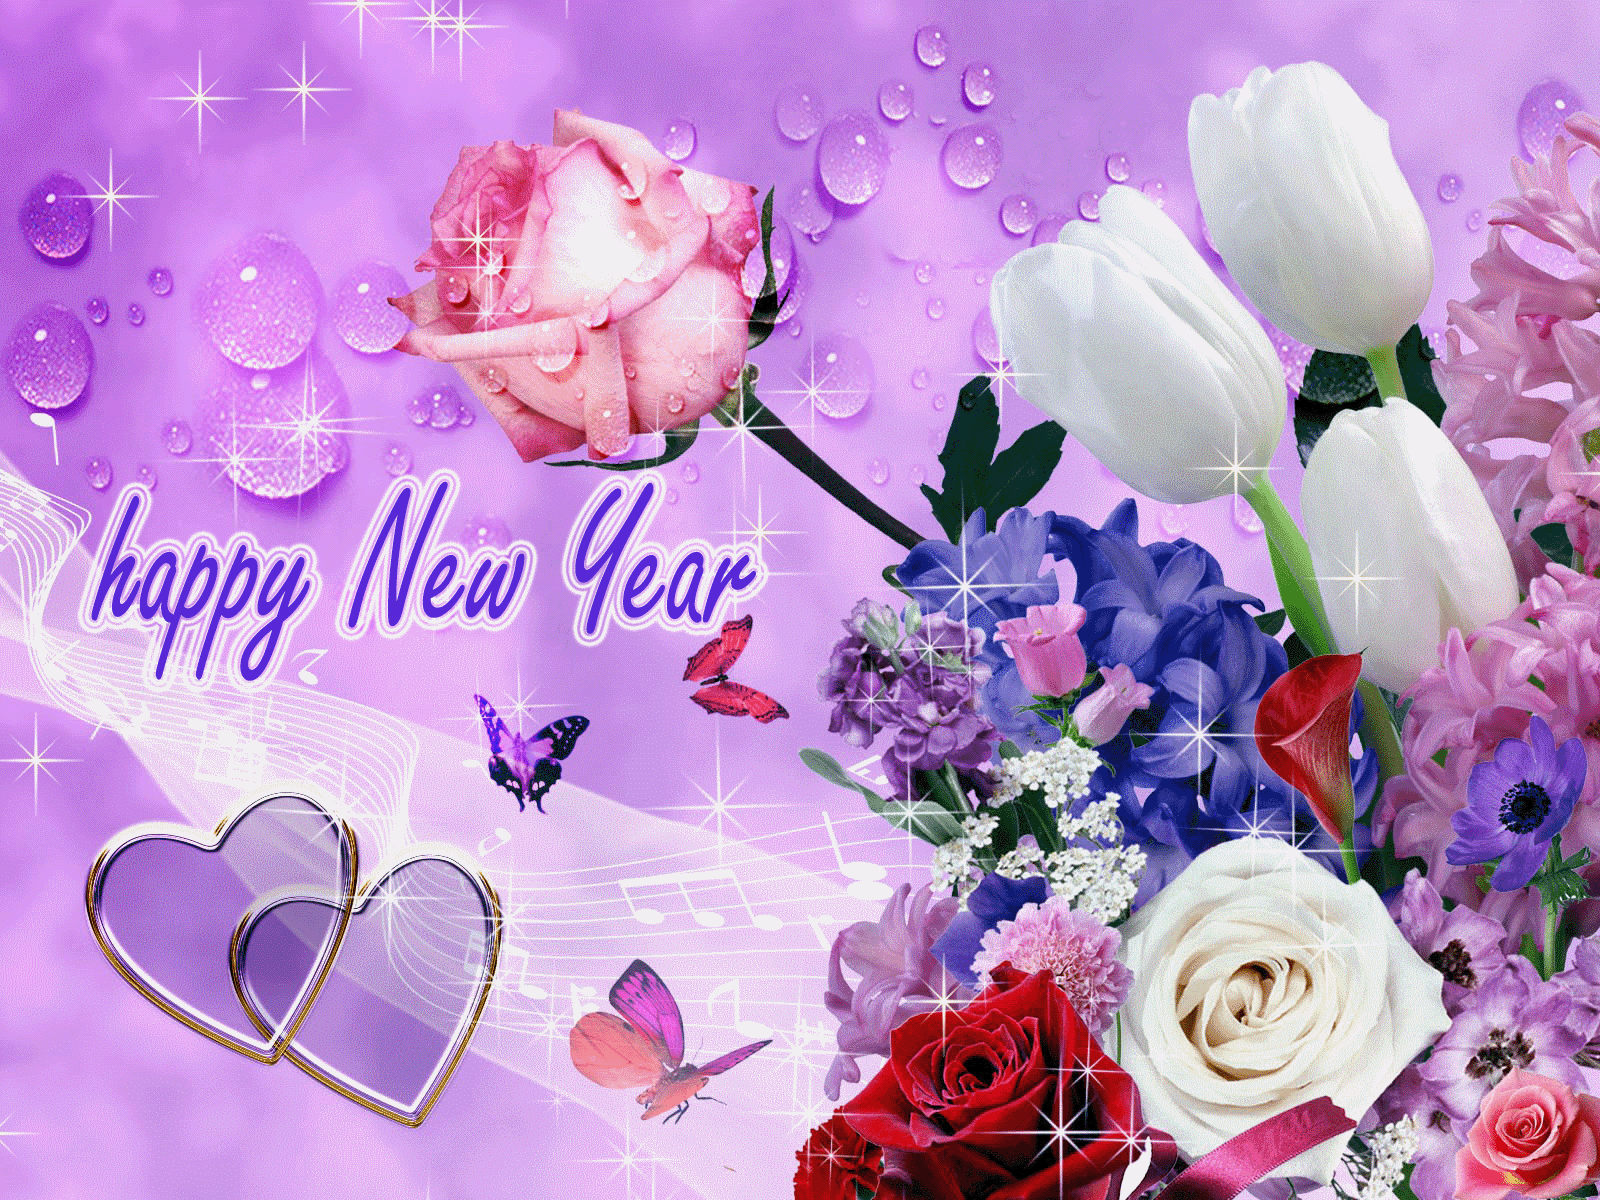 Happy new year collection wallpaper gif